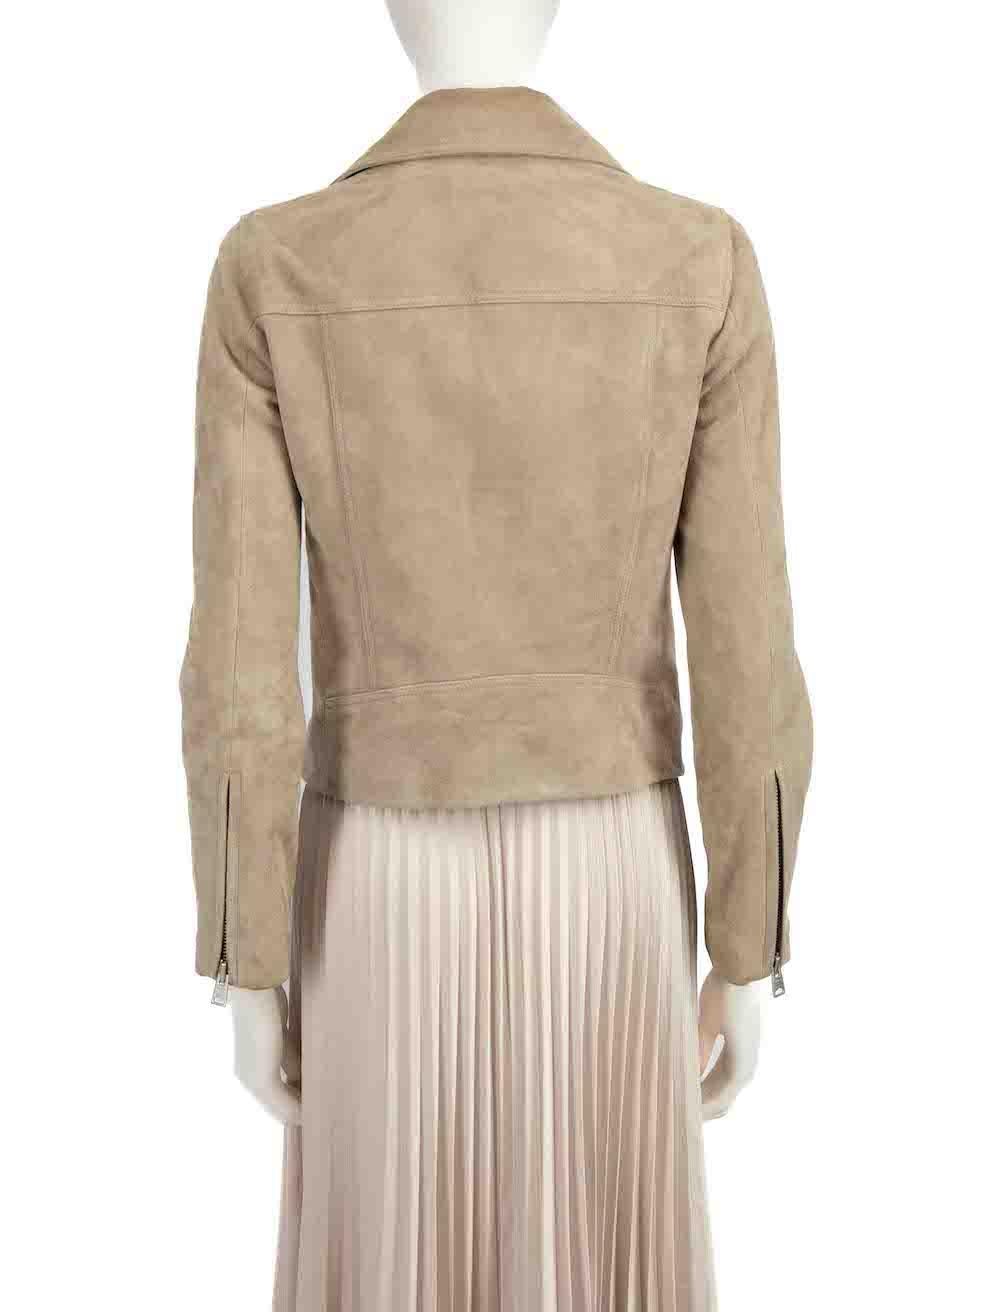 All Saints Beige Suede Dalby Biker Jacket Size M In Good Condition For Sale In London, GB